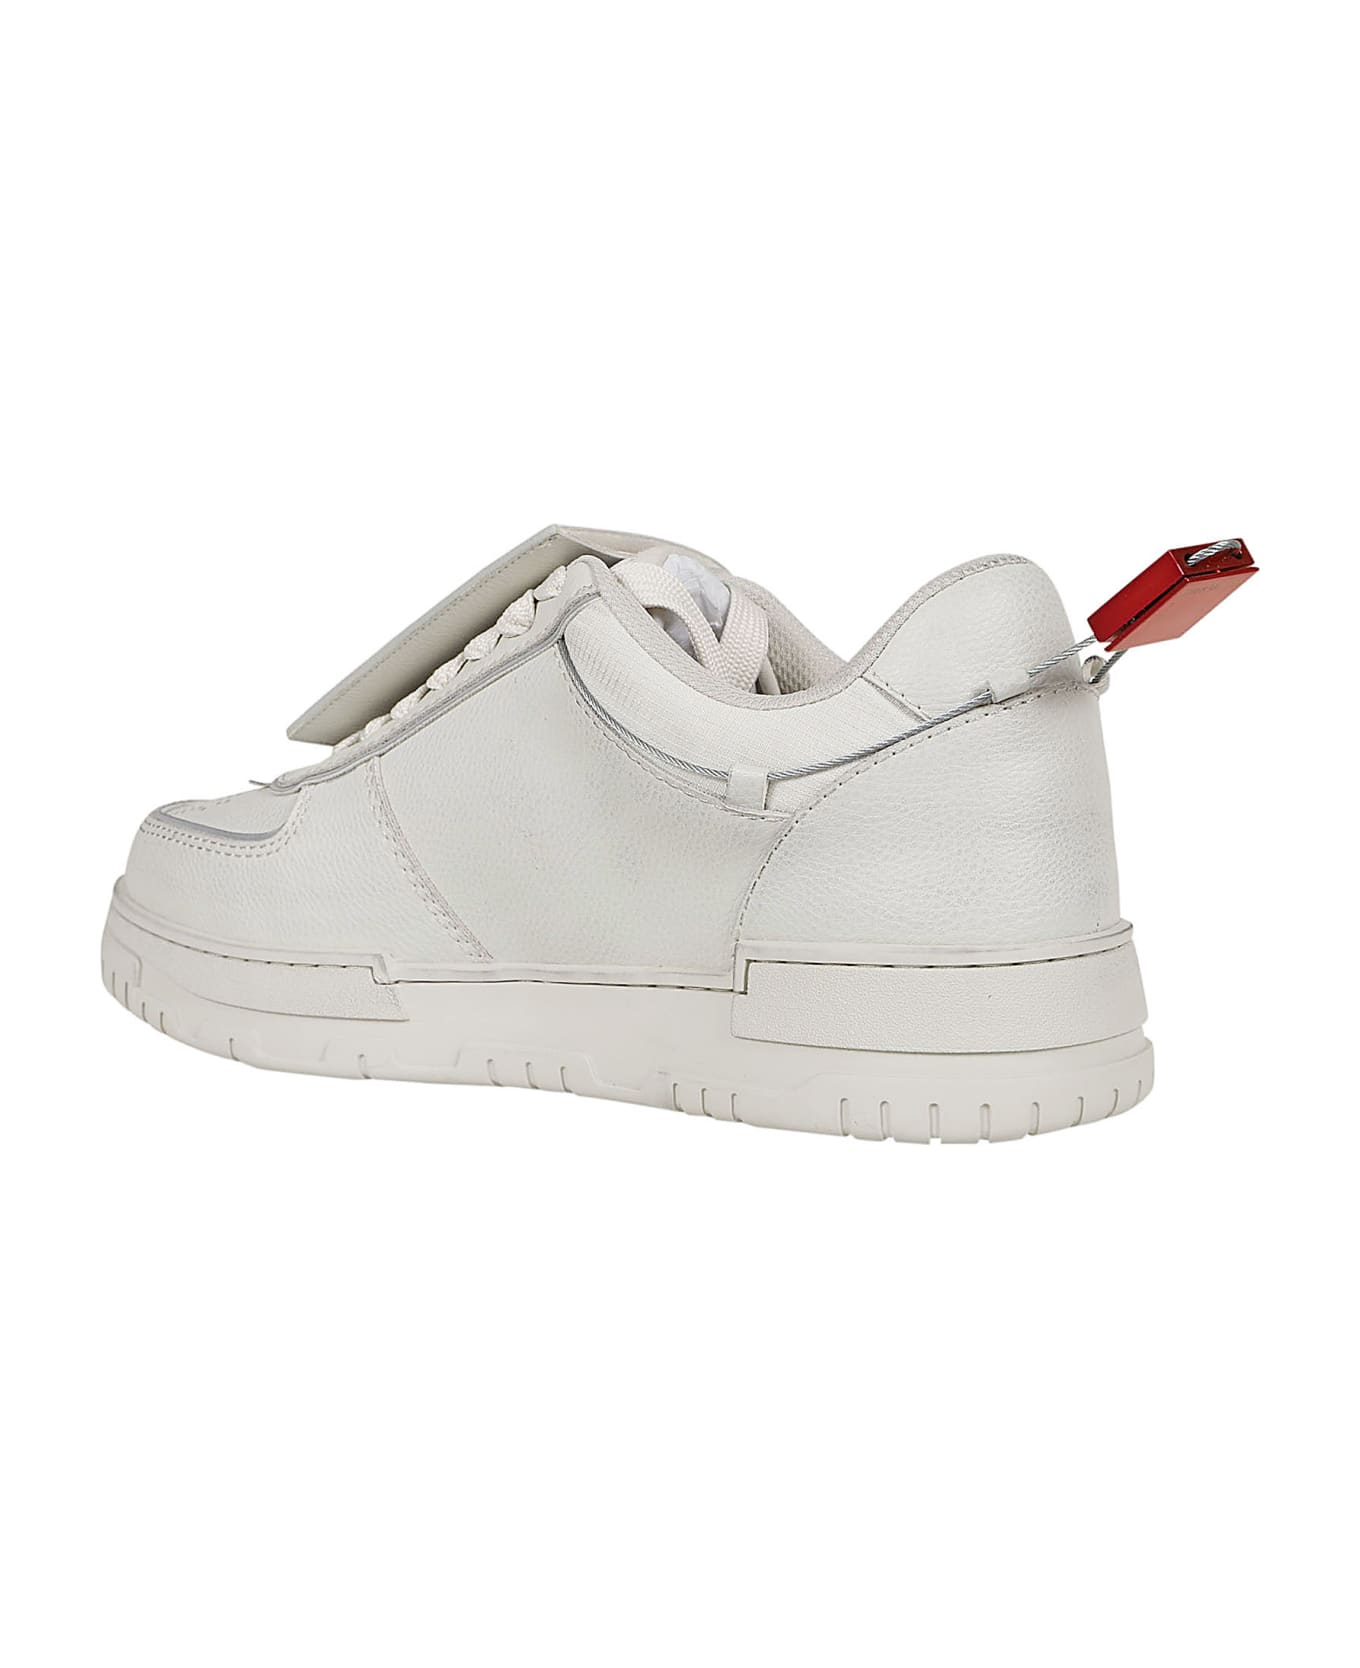 44 Label Group Sneakers - Sneakers GINO ROSSI MI08-OTSEGO-04 White